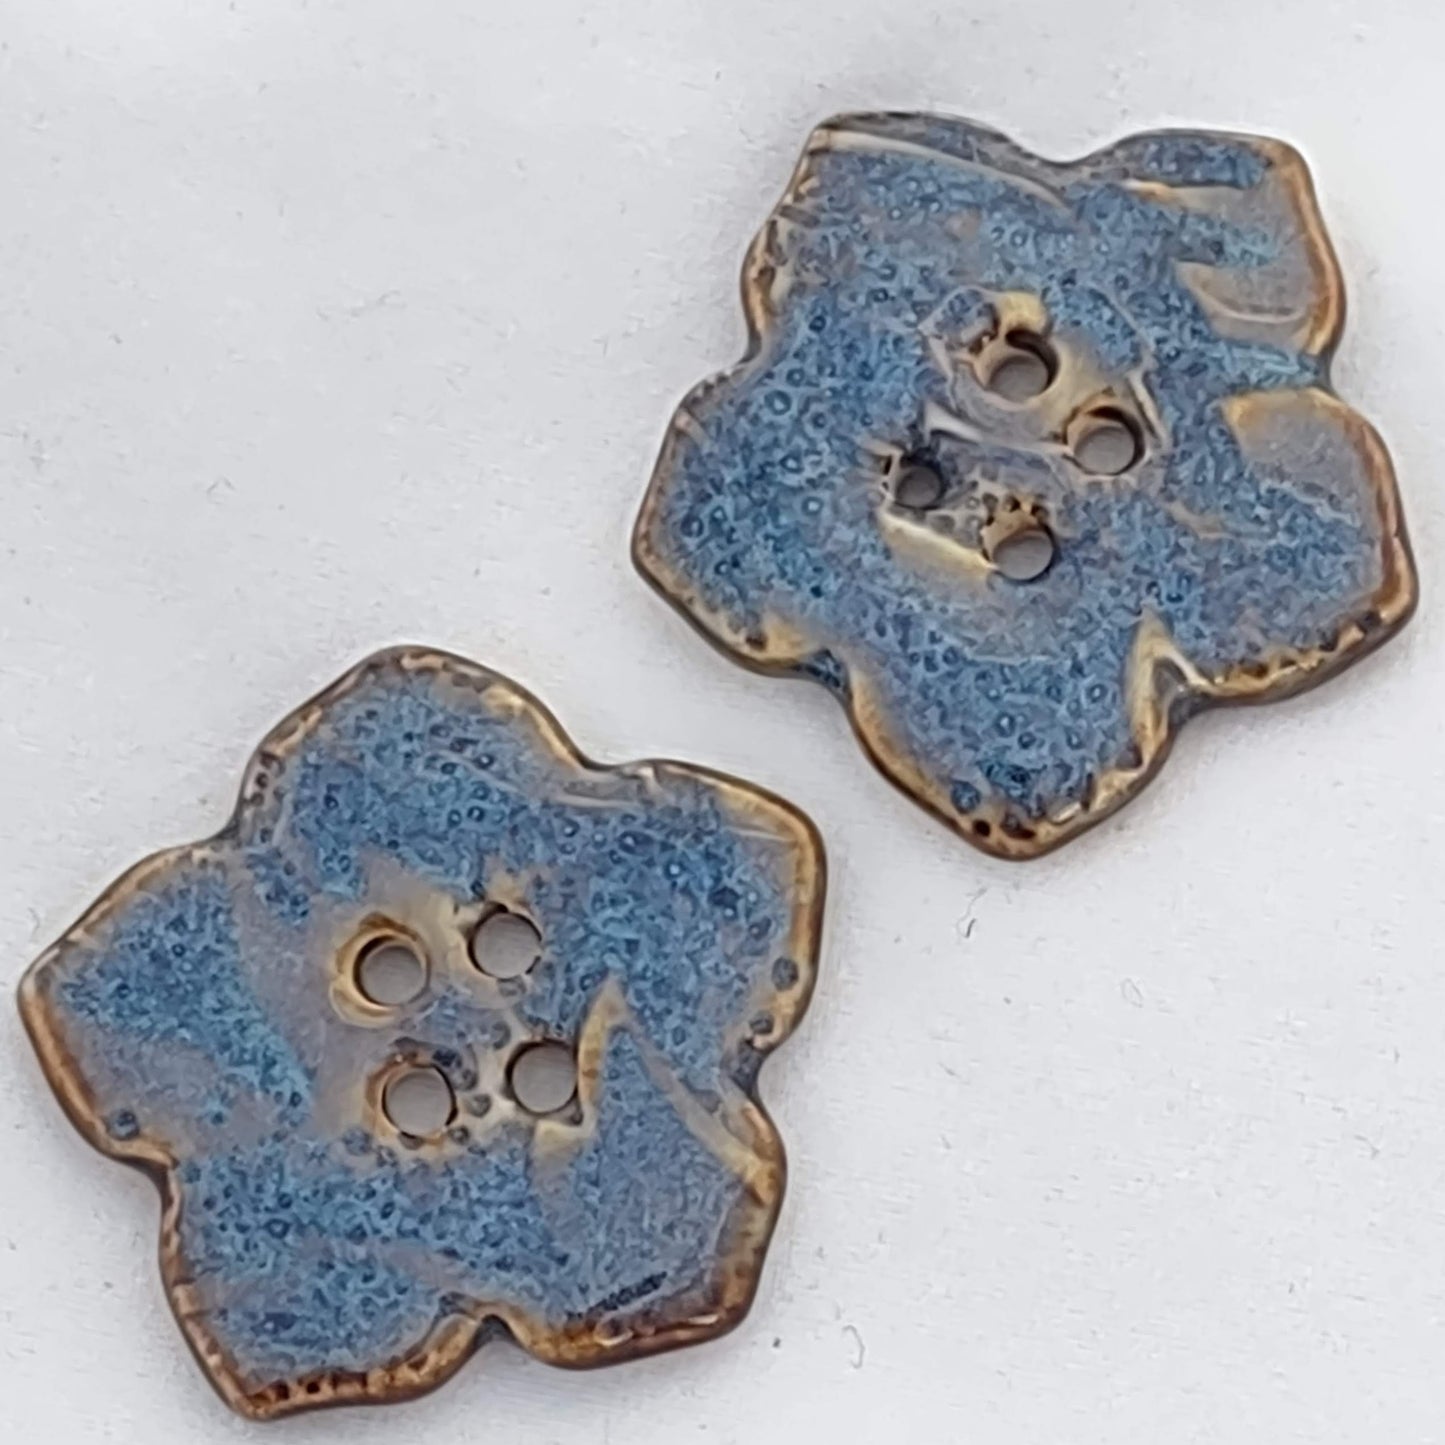 styylized leaf texture blue brown flower shaped buttons by flicker bug